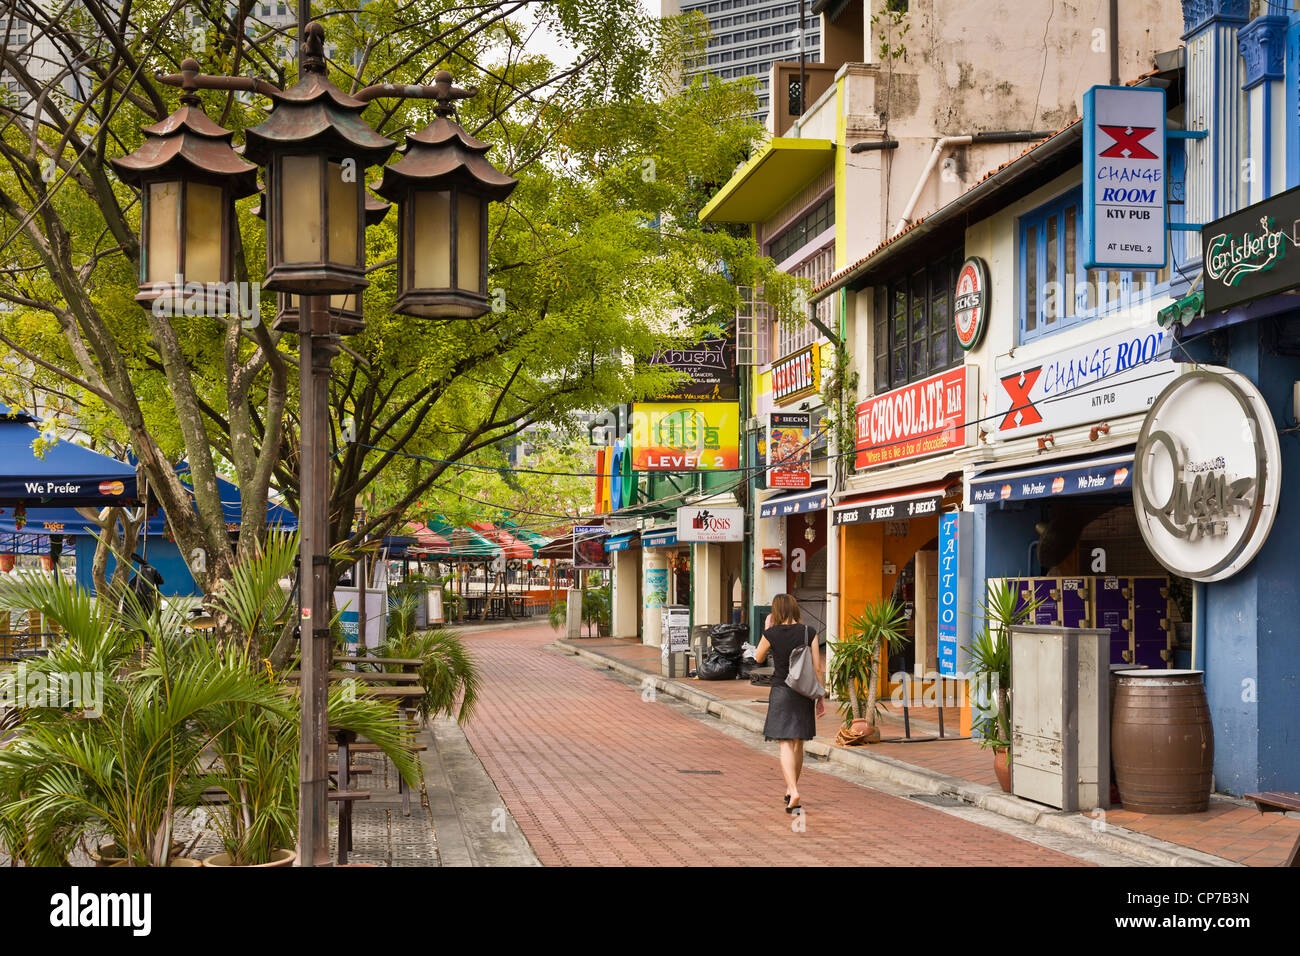 Shops and restaurants on Boat Quay, Singapore, early in the day before the crowds arrive. Stock Photo